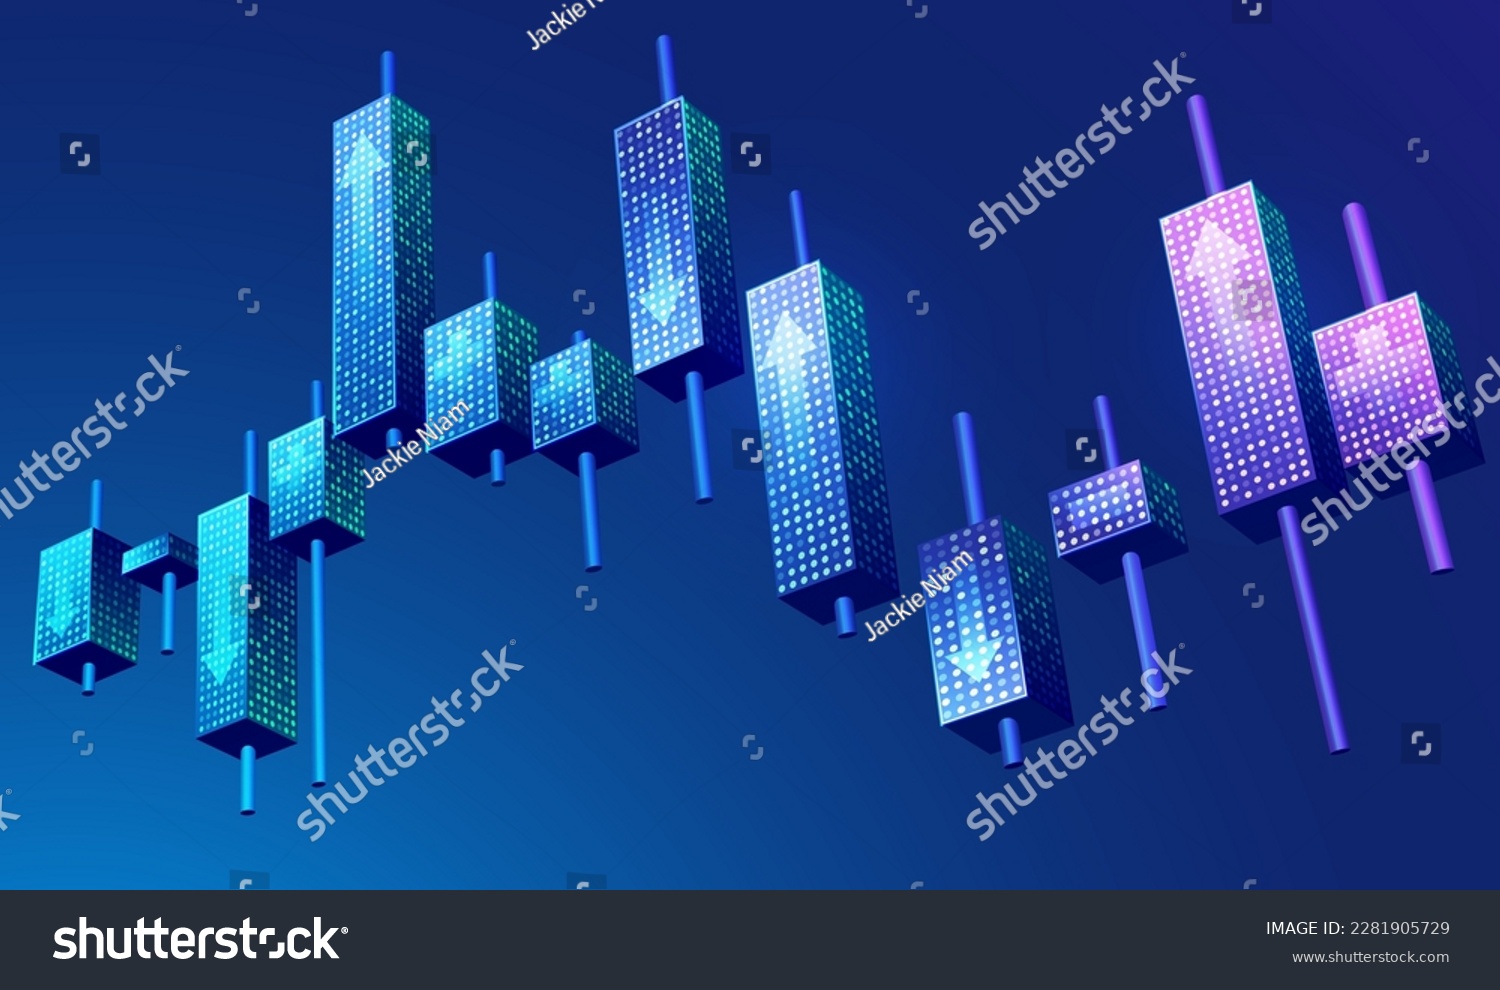 SVG of graphic of  3D candlestick in stock market presented in futuristic style svg